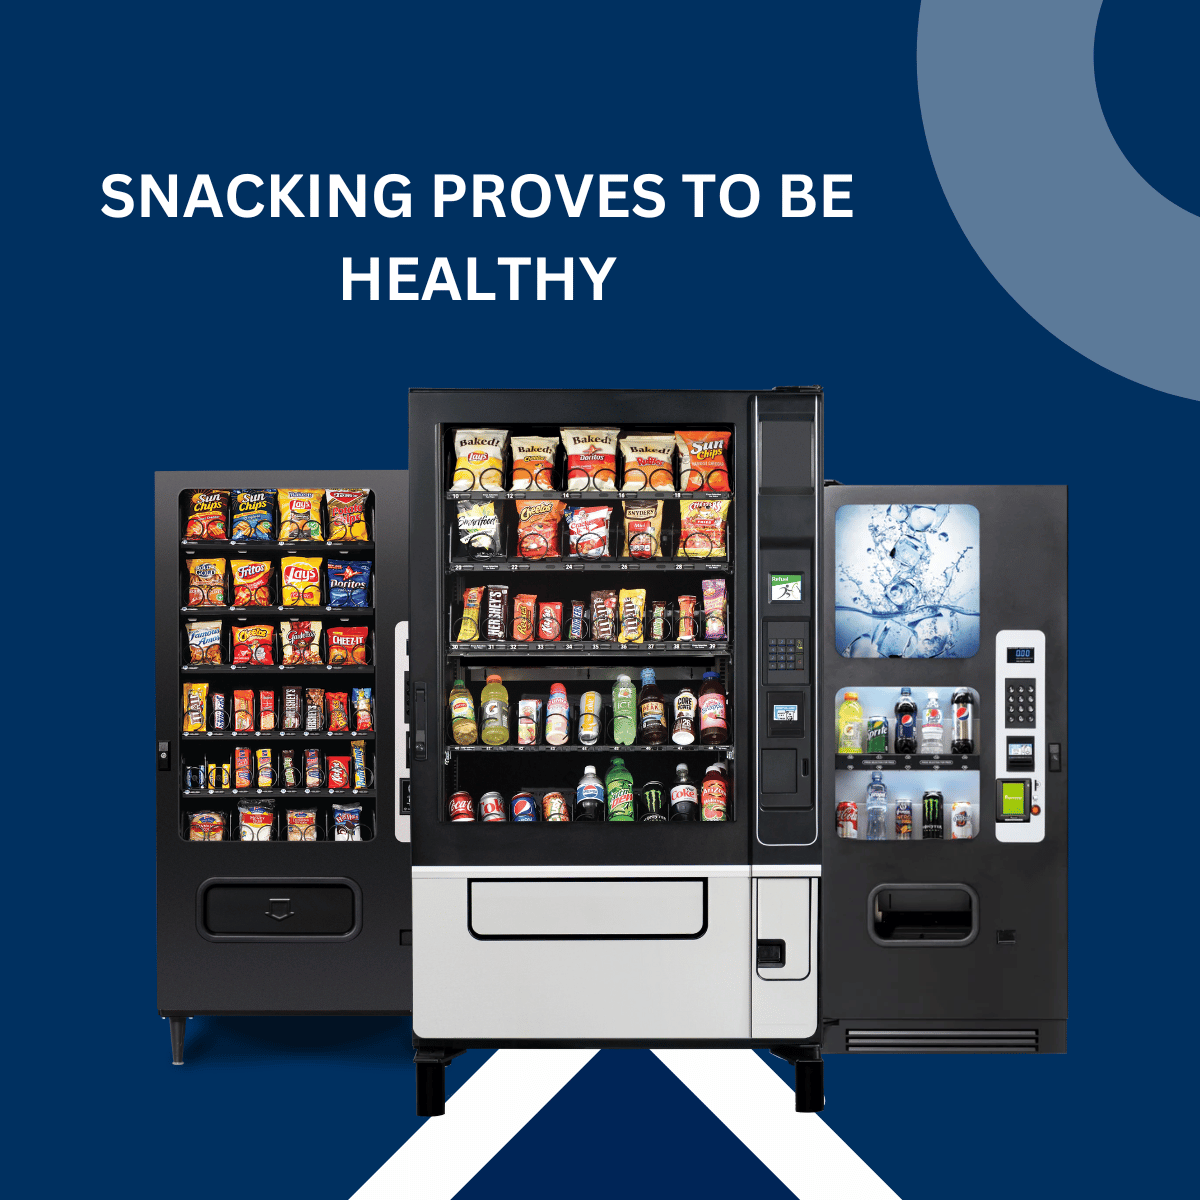 SNACKING PROVES TO BE HEALTHY